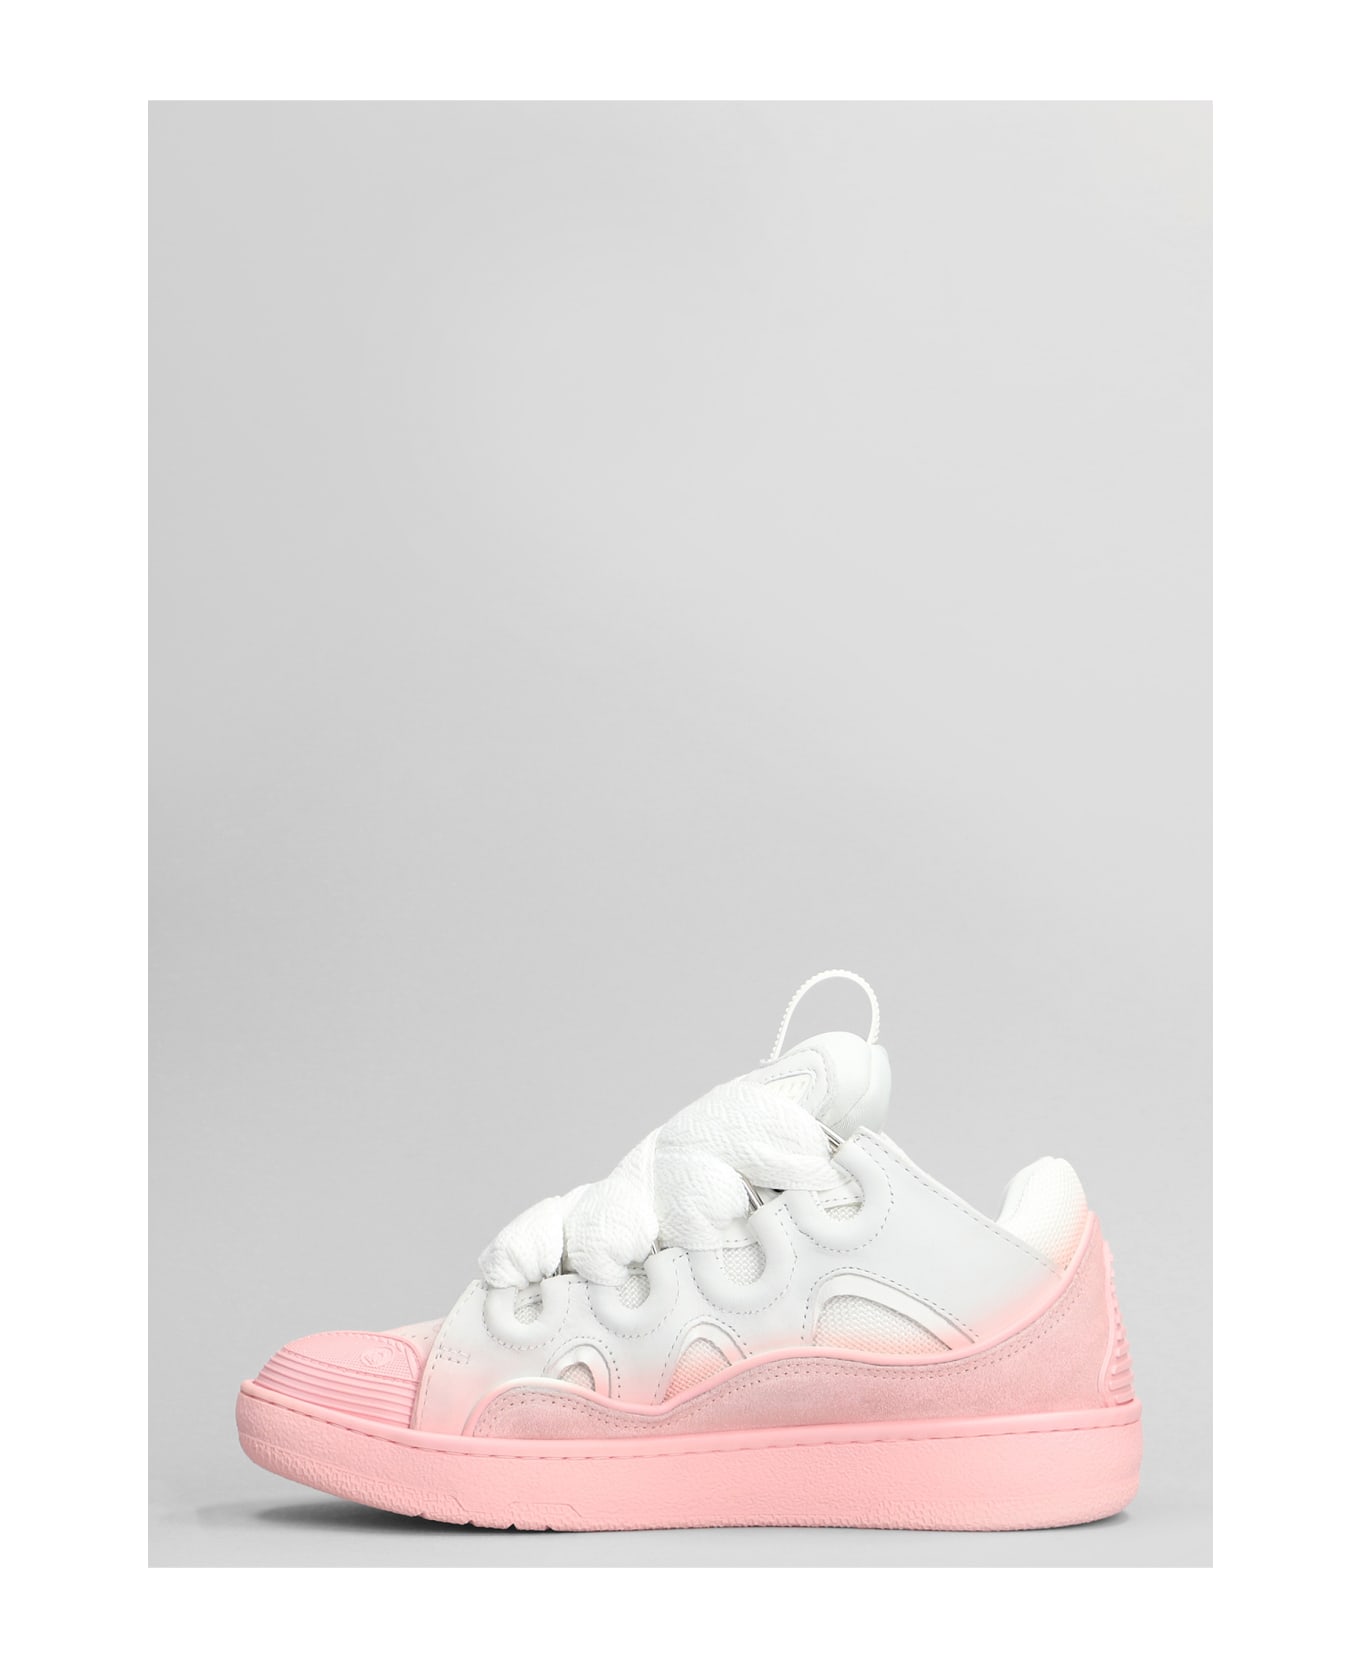 Lanvin Curb Sneakers In Rose-pink Leather - rose-pink スニーカー